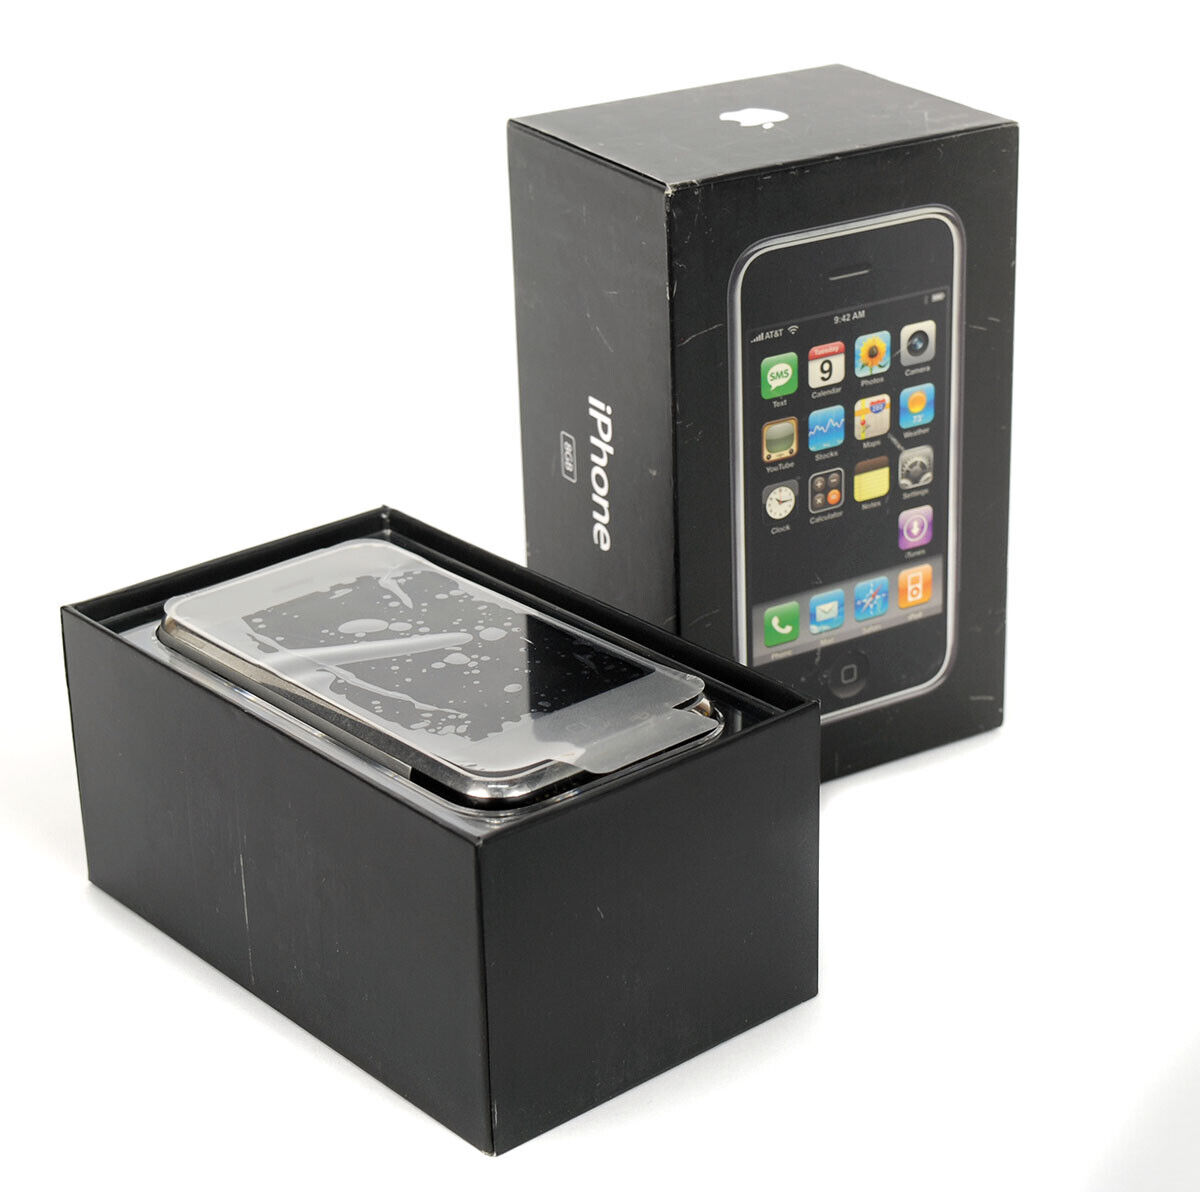 The Price of Apple iPhone 2G 8GB – Matching Box & Beautifully Preserved Accessories | Apple iPhone